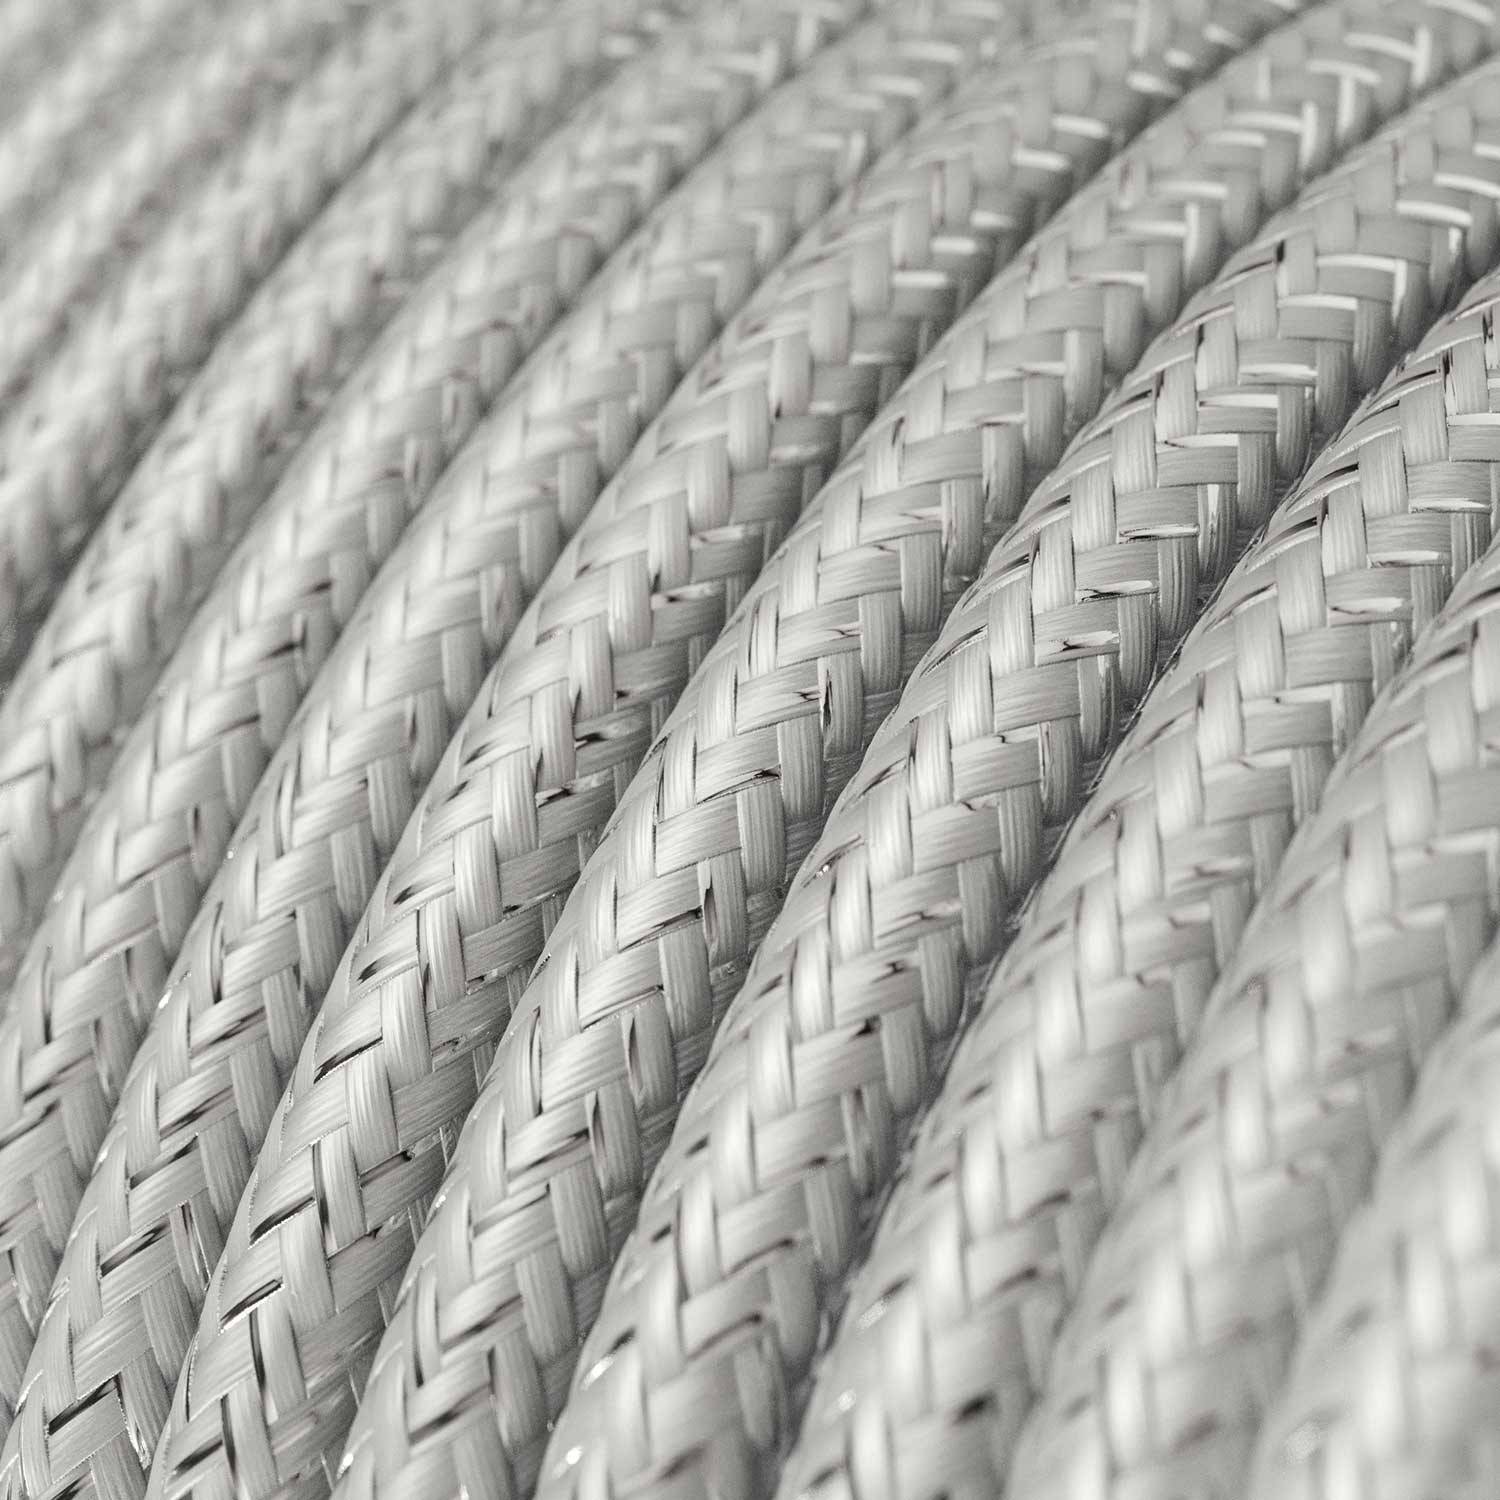 Glossy Silver Glitter Textile Cable - The Original Creative-Cables - RL02 round 2x0.75mm / 3x0.75mm